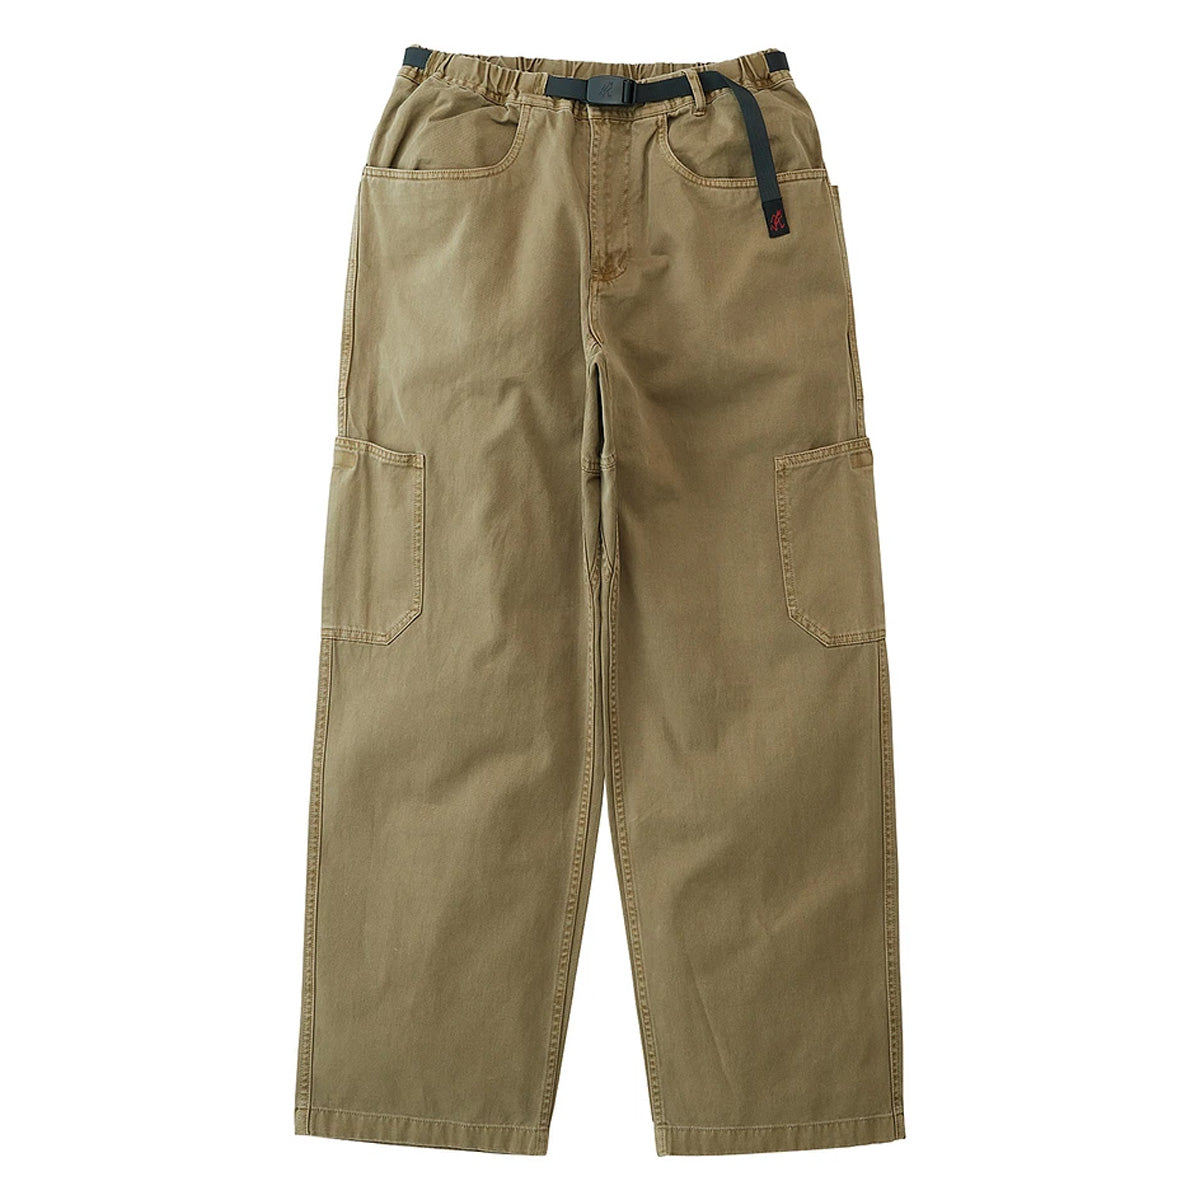 Khaki green gramicci outdoor trousers with Velcro side pockets and adjustable waist. Free uk shipping over £50